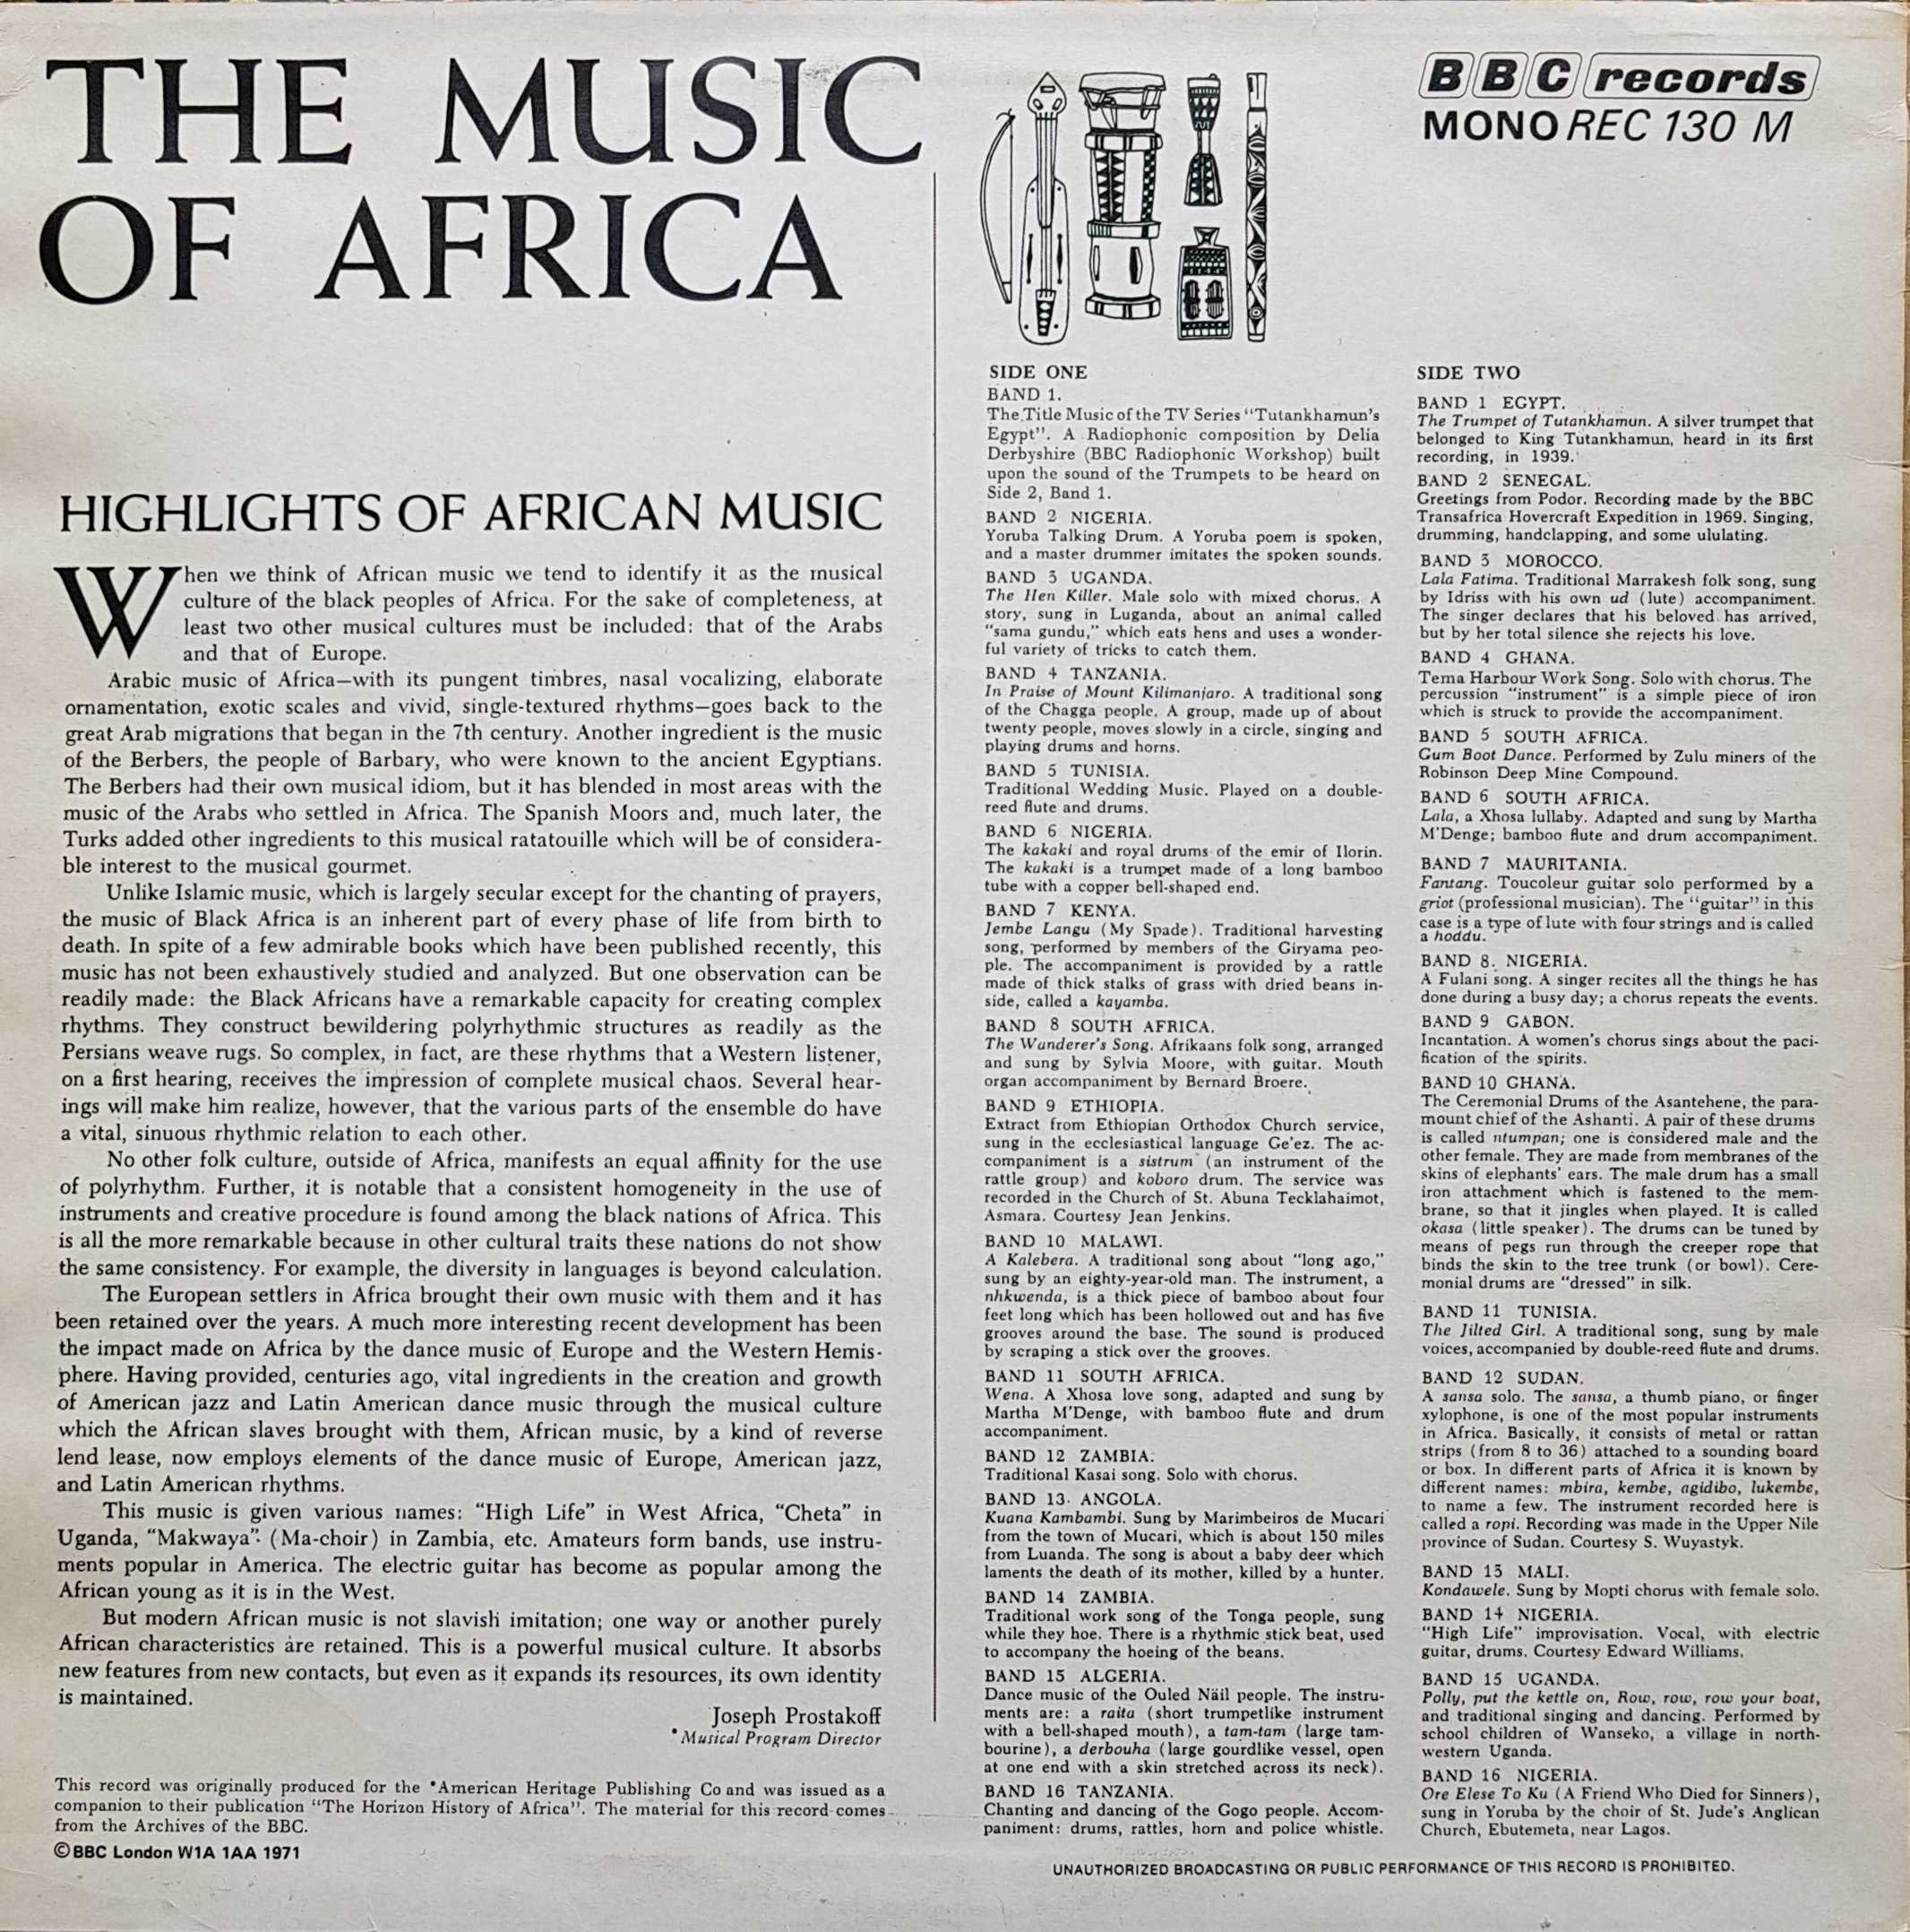 Picture of REC 130 The Music of Africa by artist Various from the BBC records and Tapes library